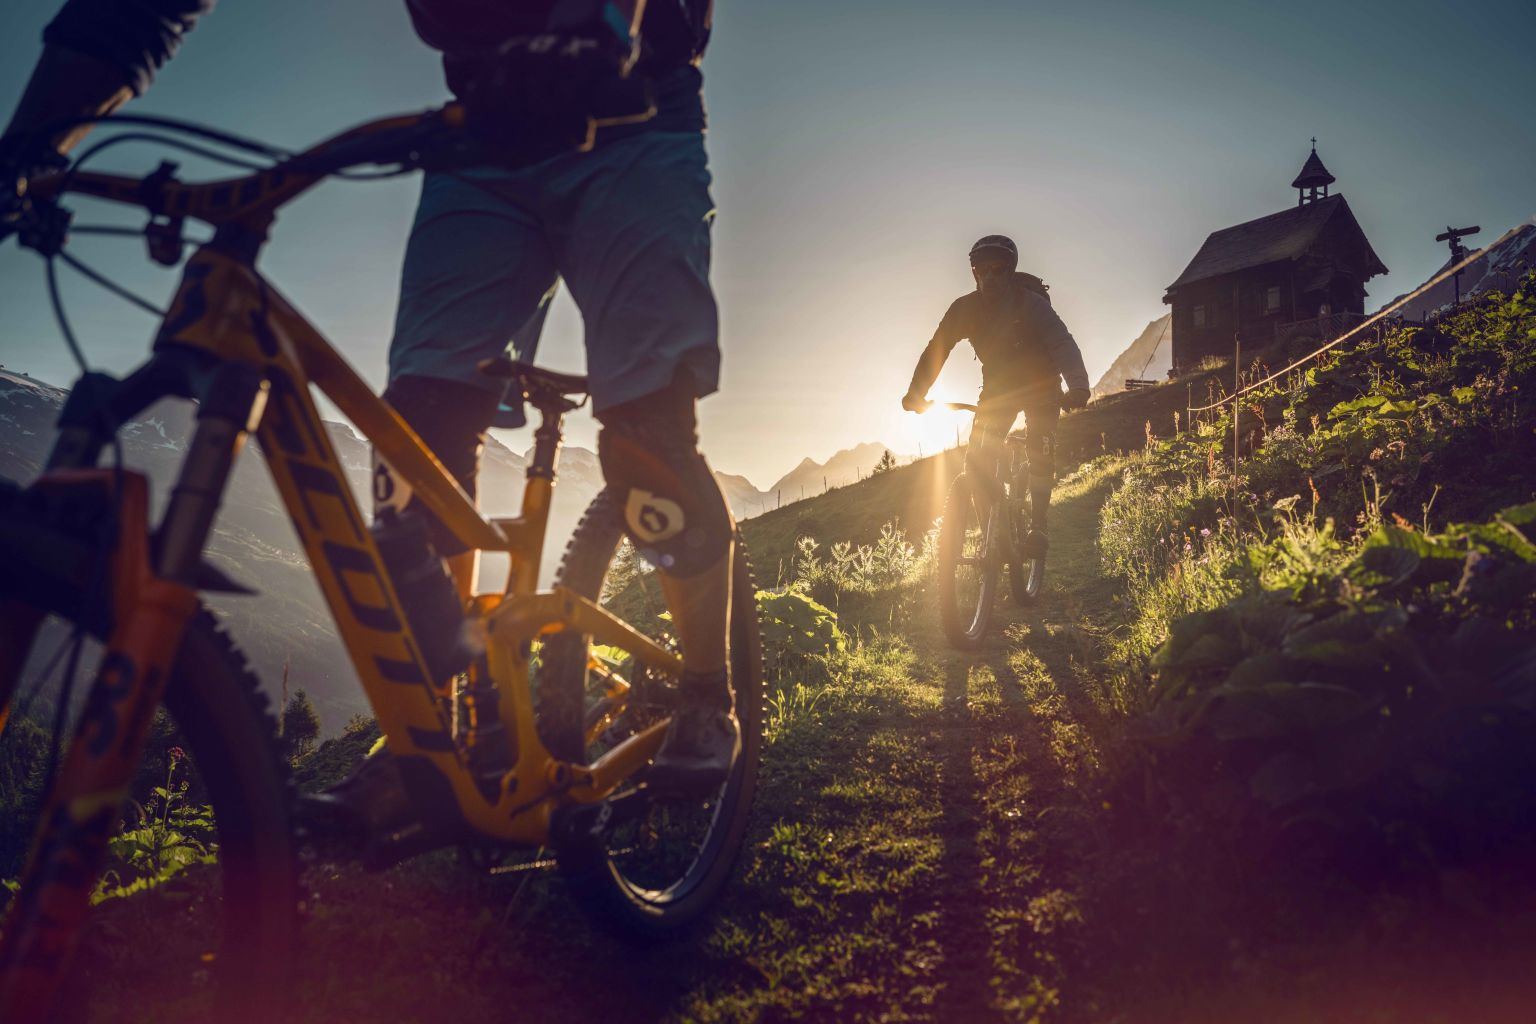 Two mountain bikers finish their day of mountain biking with a setting sun in the Lötschental. Valais, Switzerland